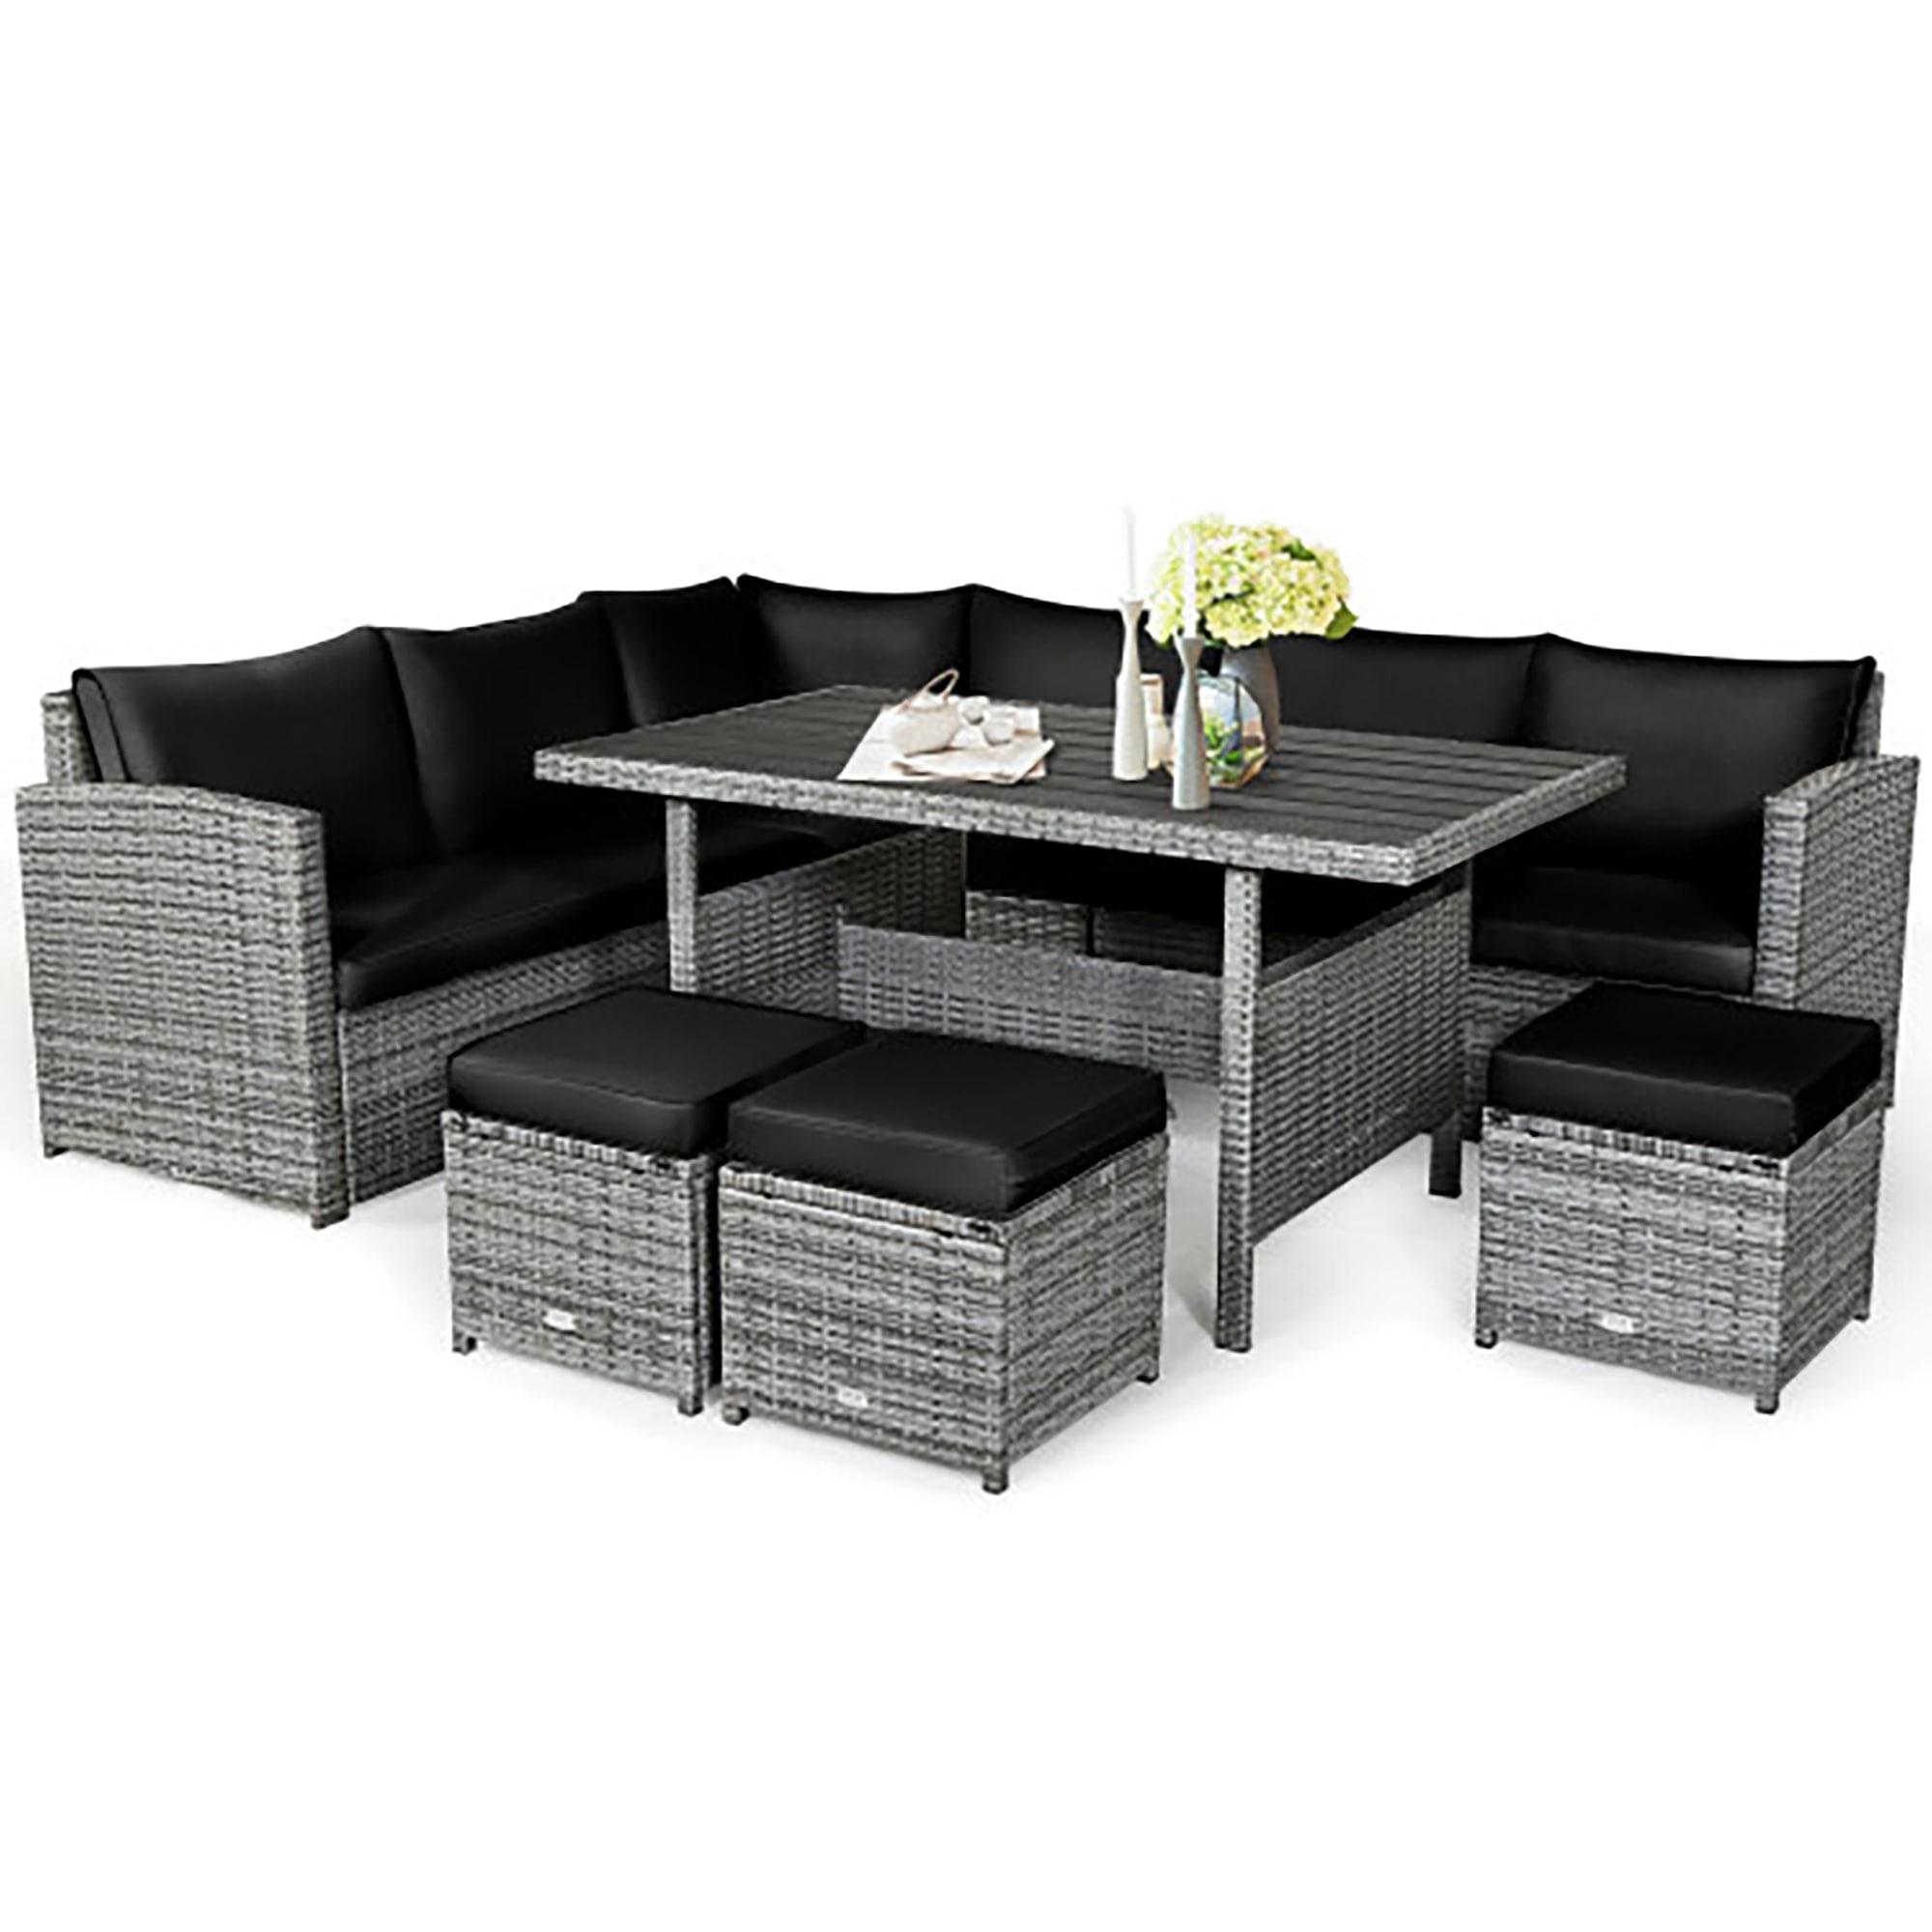 7 Pieces Patio Rattan Dining Furniture Sectional Sofa Set with Wicker Ottoman-Black | - Forclover HYFL-90BK